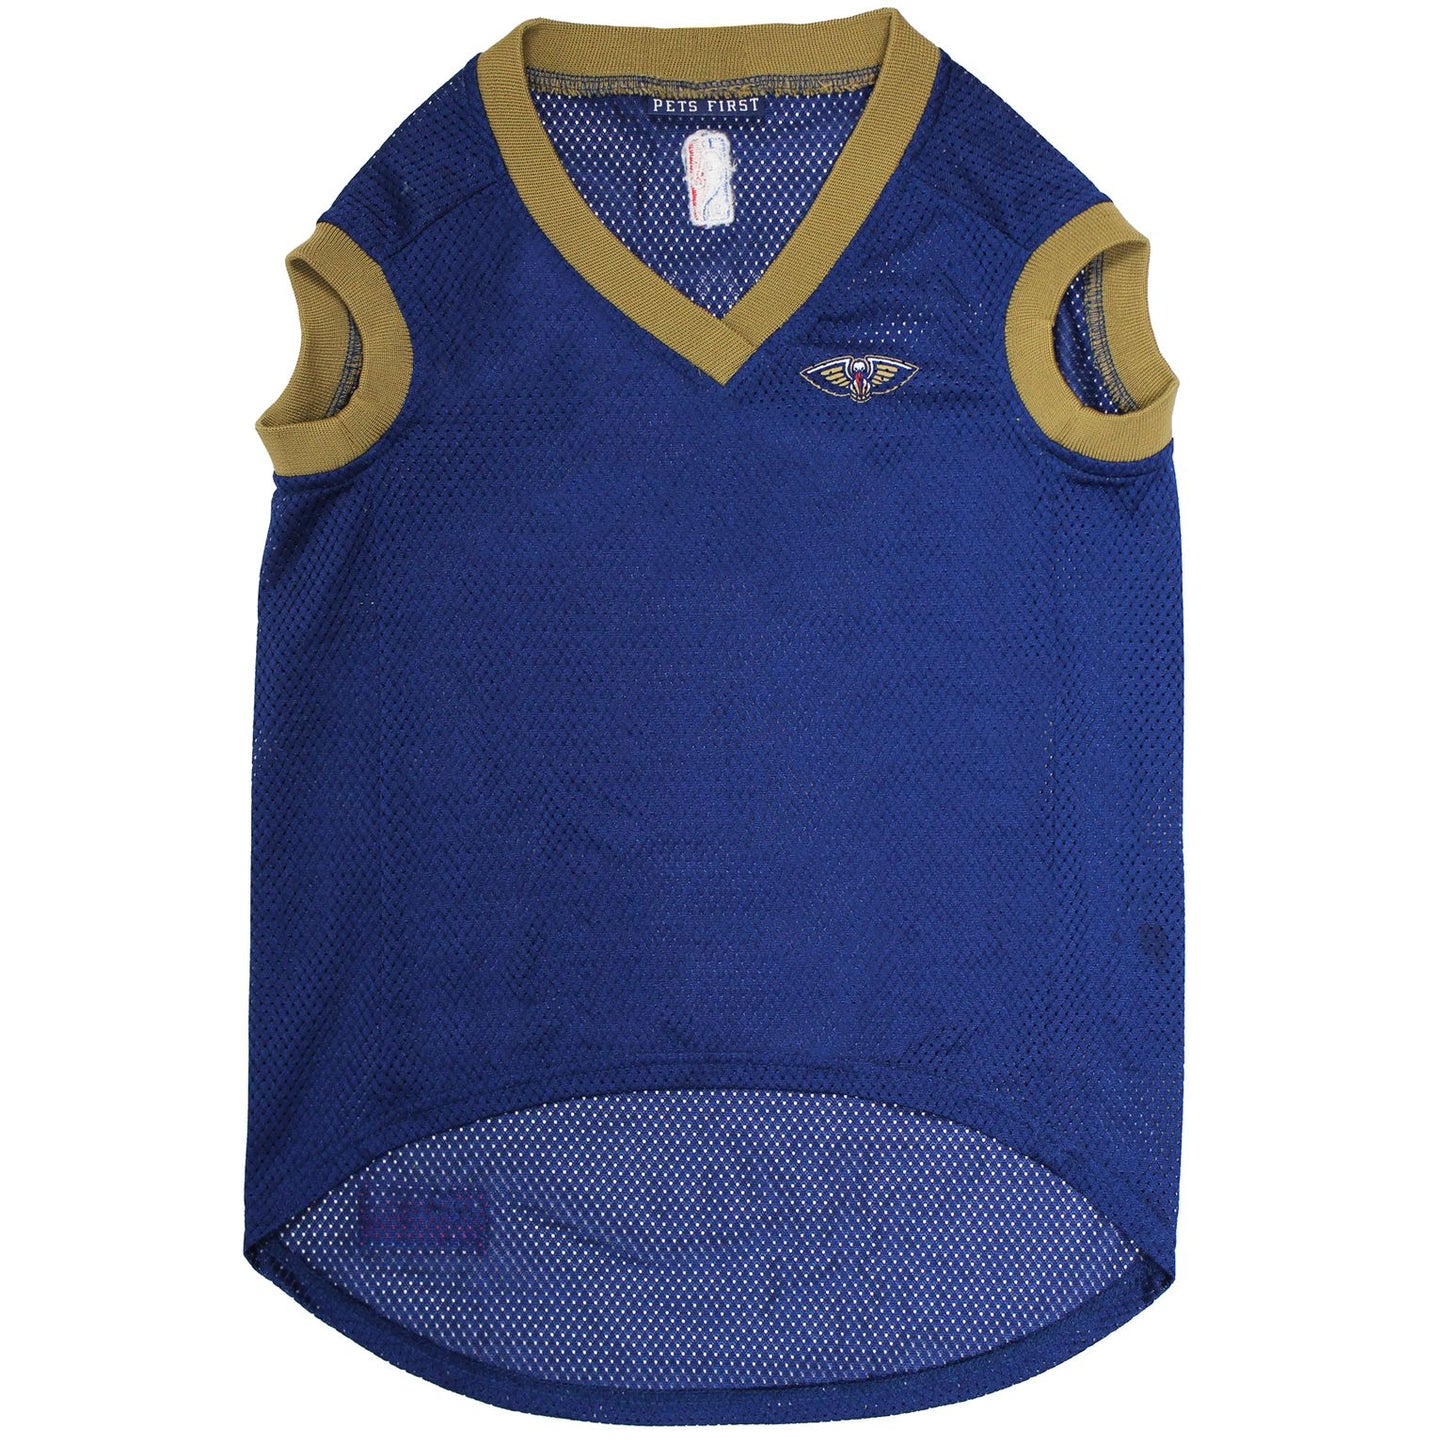 New Orleans Pelicans Mesh Jersey - Trendy Dog Boutique